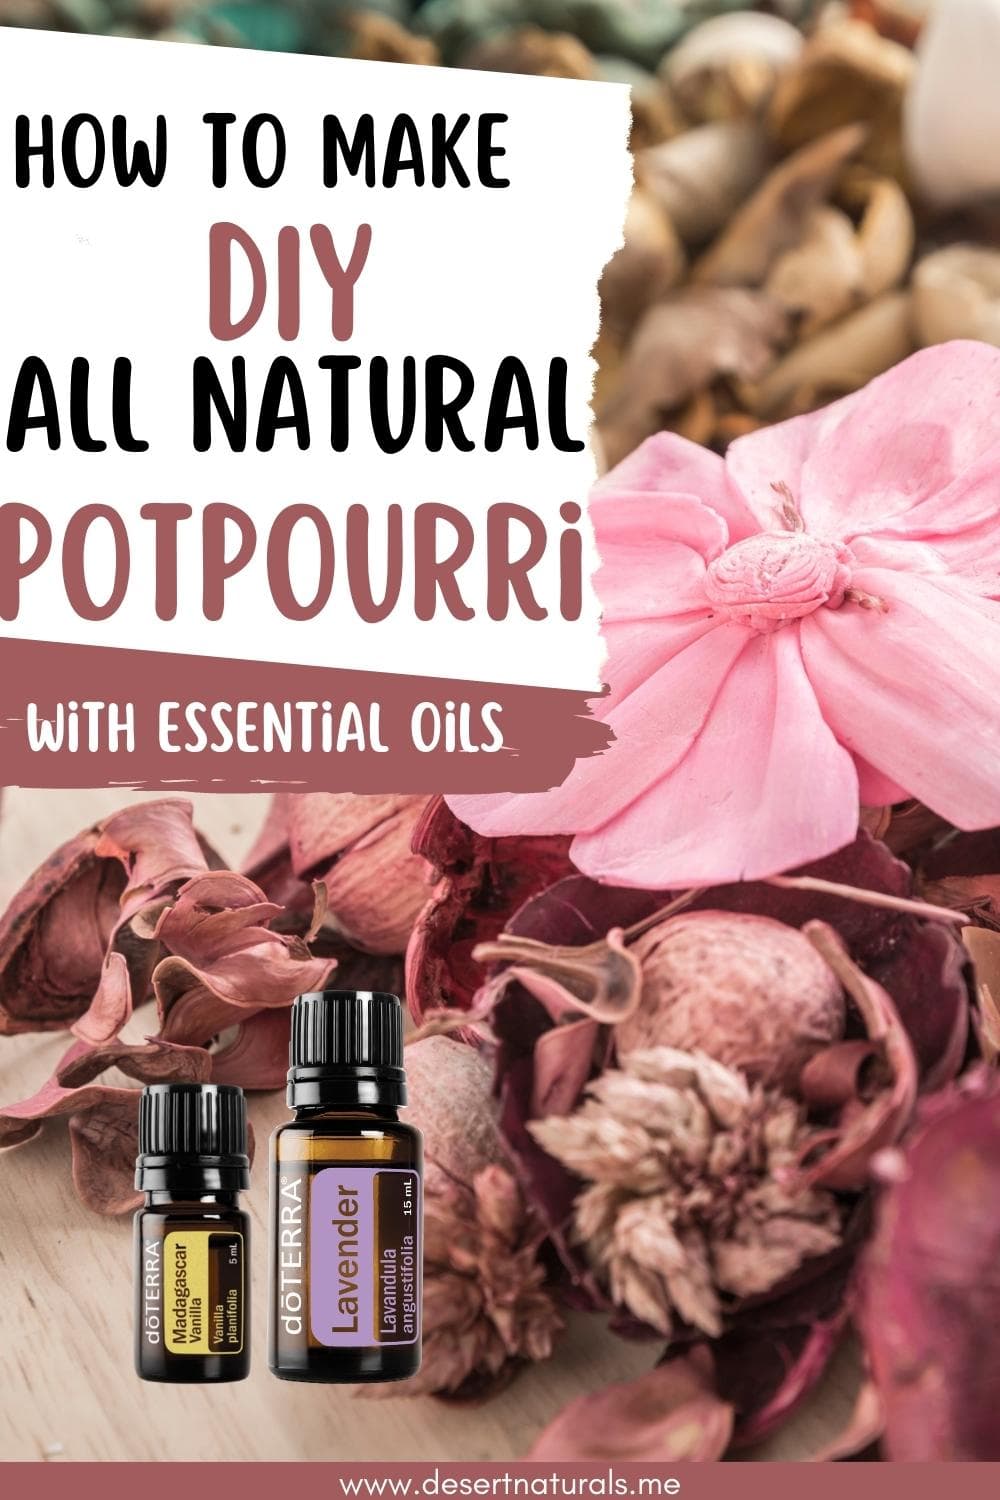 image of dried potpourri and doterra essential oil bottles with text how to make diy all natural potpourri